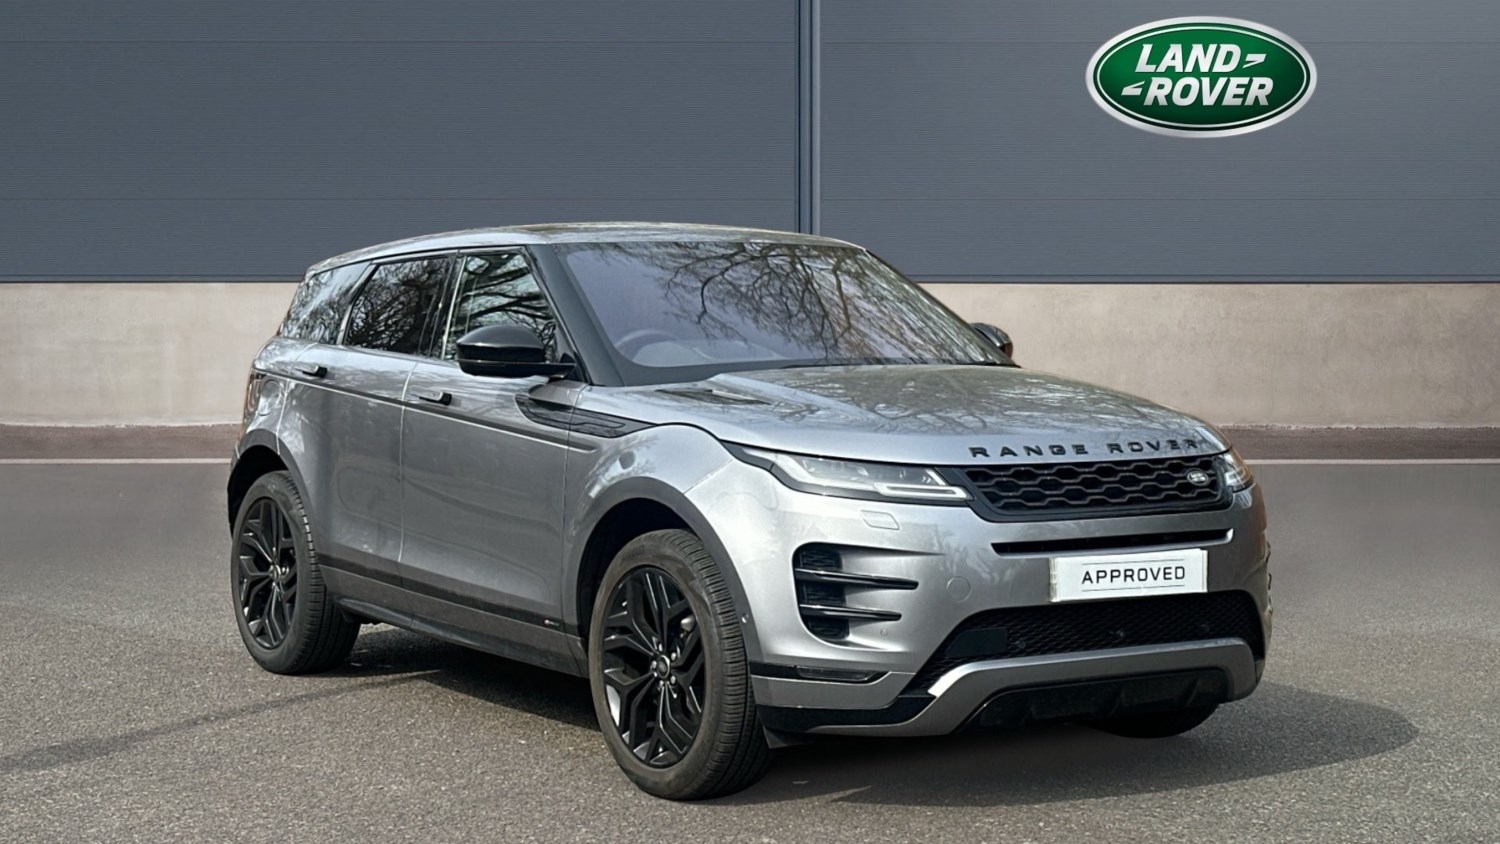 2020 used Land Rover Range Rover Evoque 2.0 P250 R-Dynamic HSE